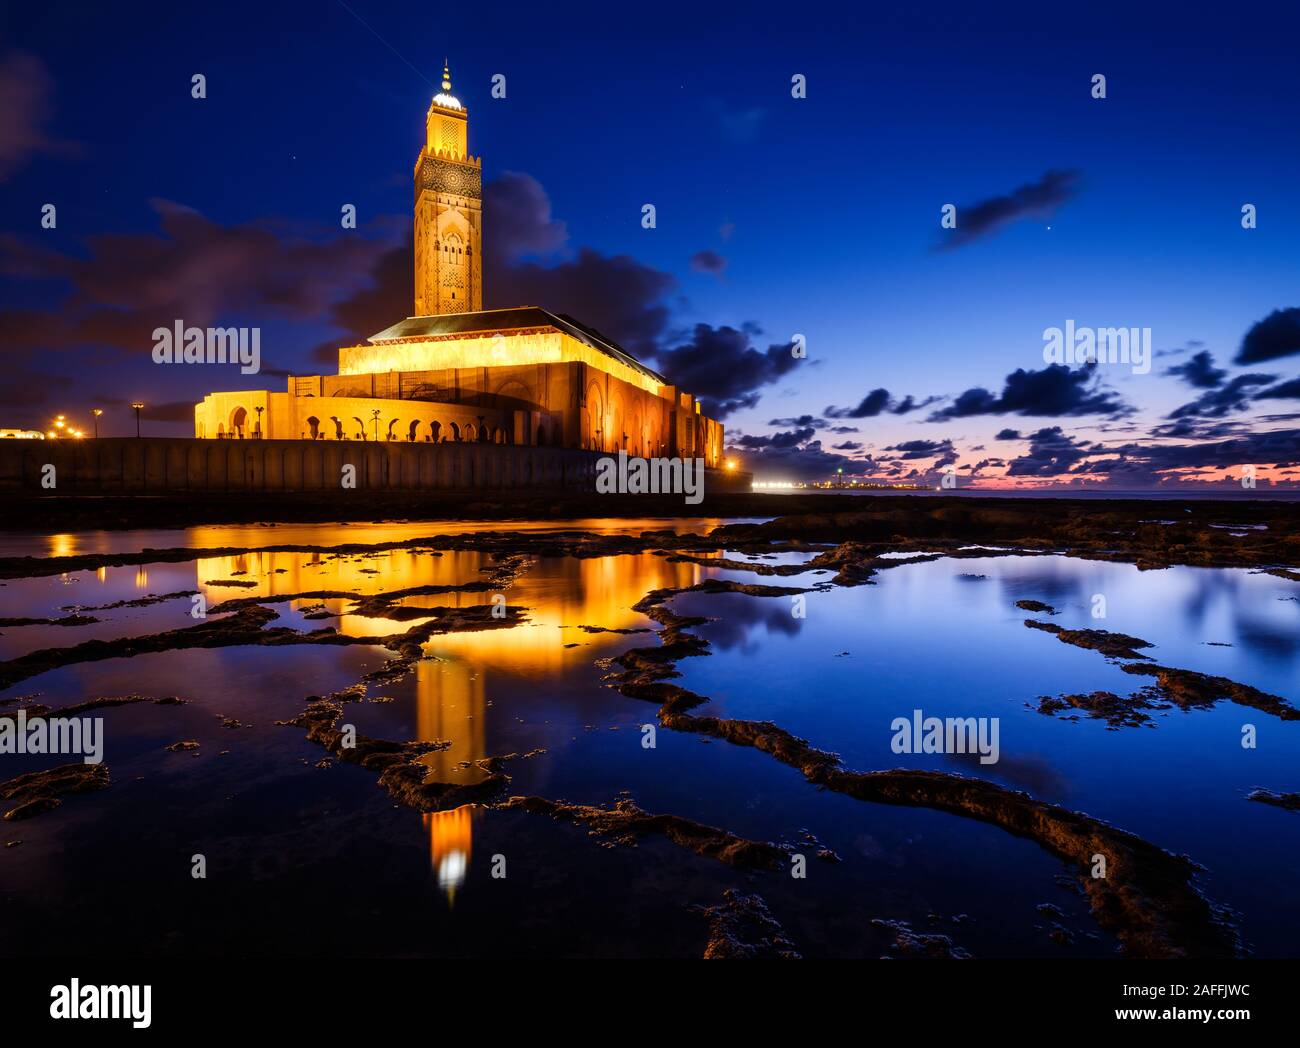 CASABLANCA, MOROCCO - CIRCA APRIL 2018: Mosque  Hassan II in Casablanca at Night as seen from the tidal pools formed by the ocean around it. Stock Photo